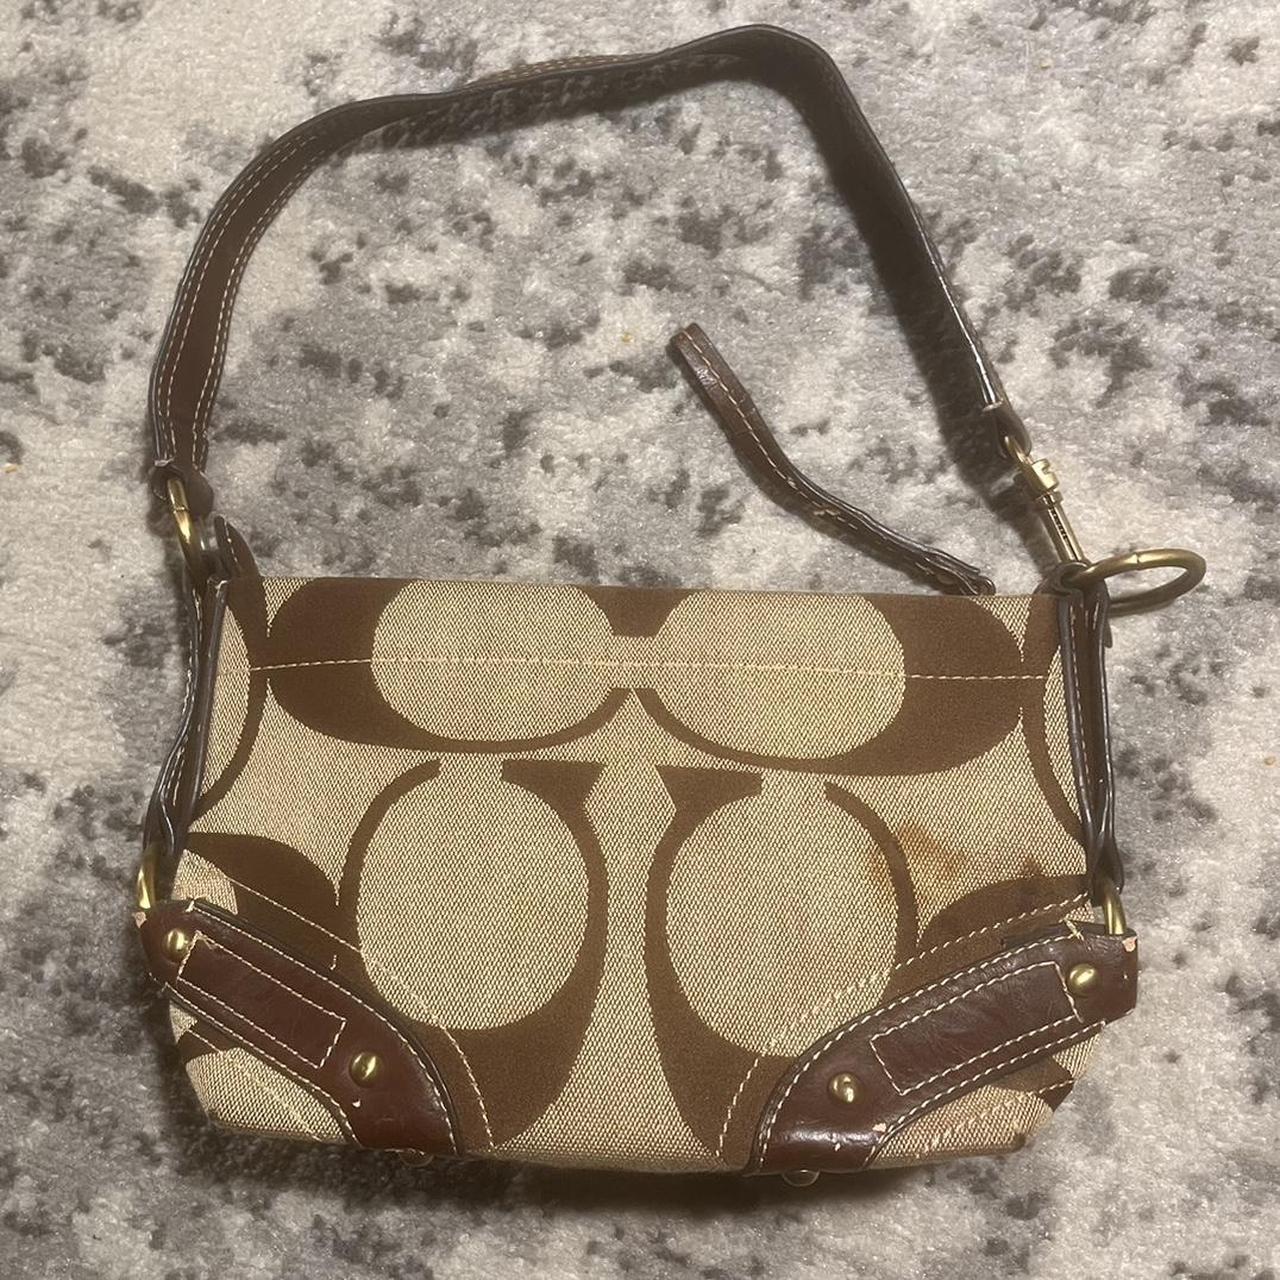 Coach purse small brown - $11 - From Rachel